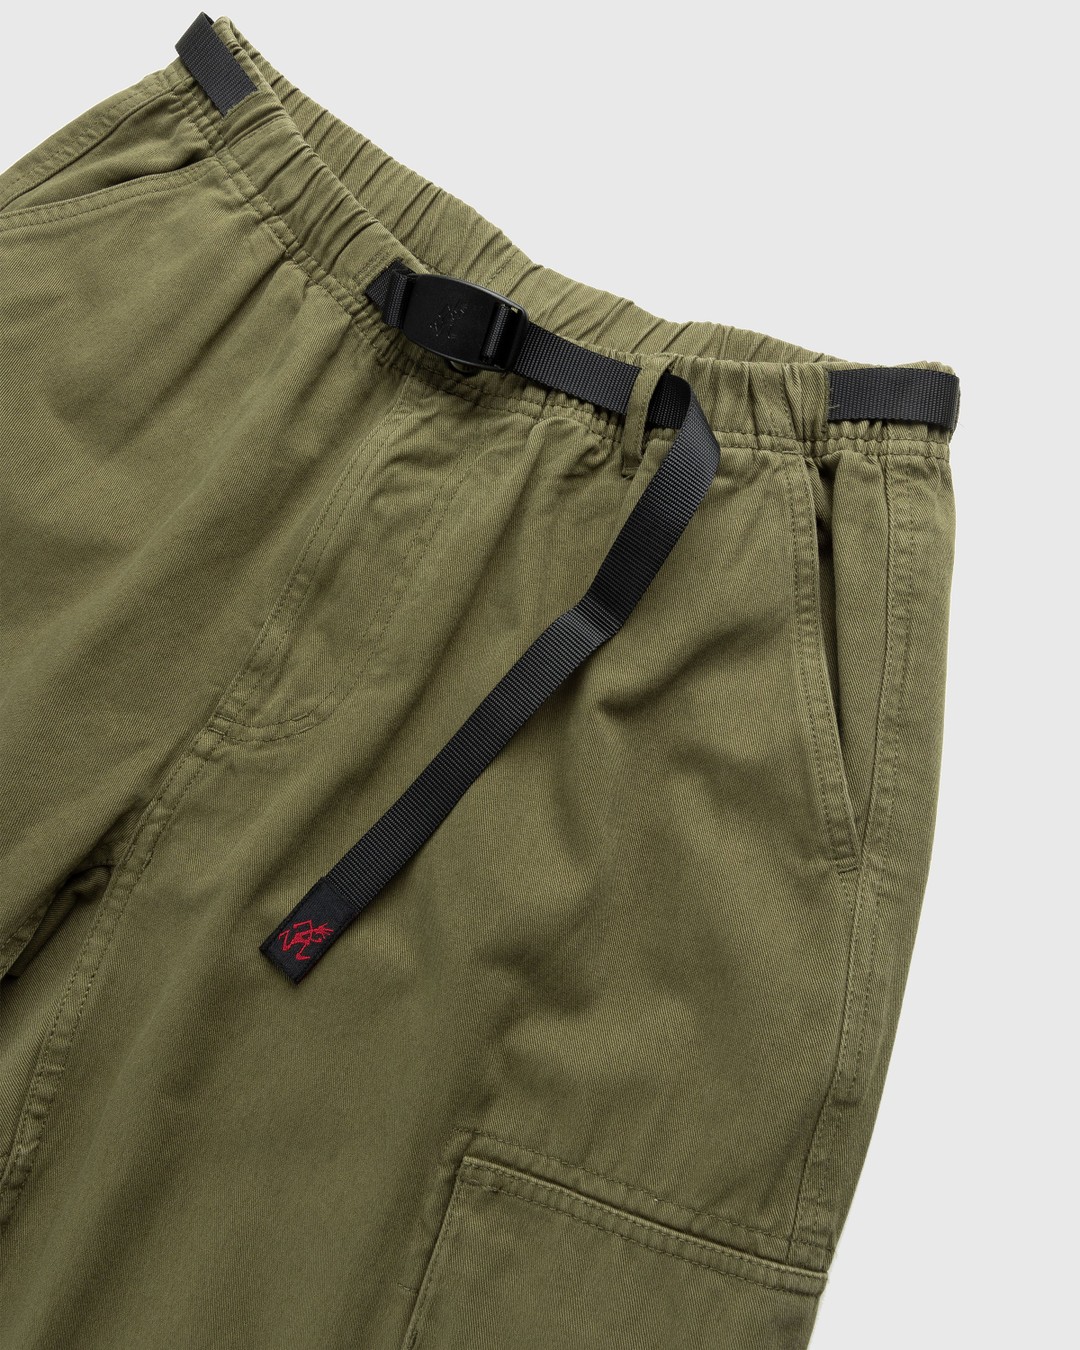 Gramicci – Cargo Pant Olive - Cargo Pants - Green - Image 3